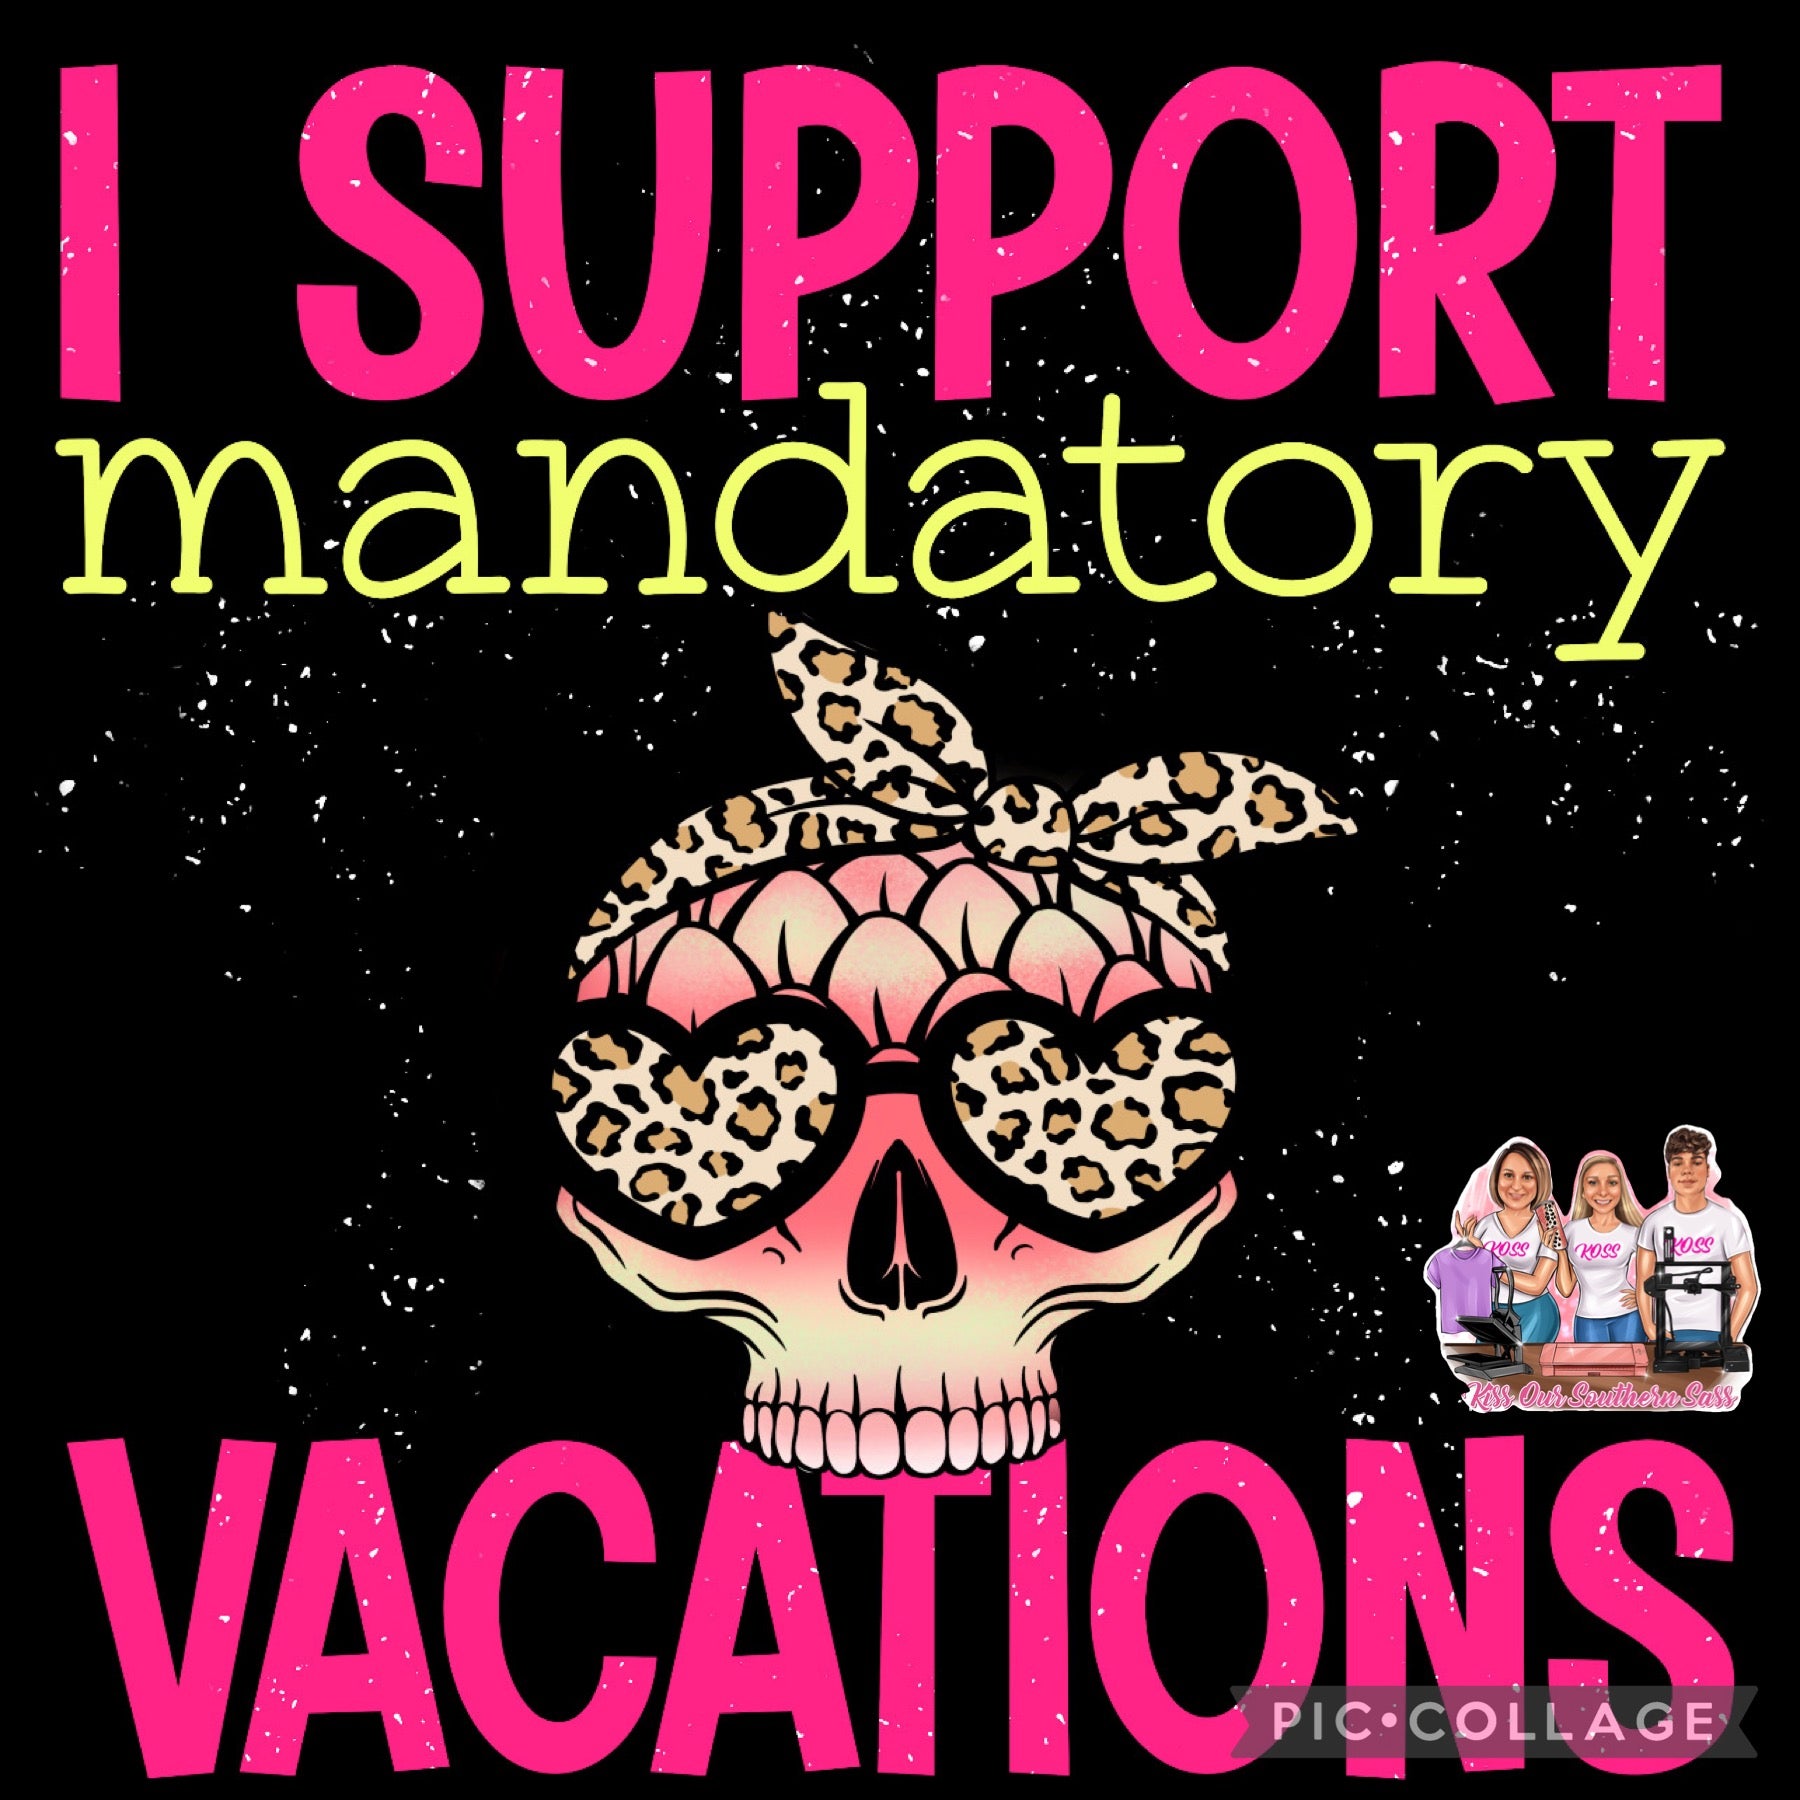 I Support Mandatory Vacations with pocket